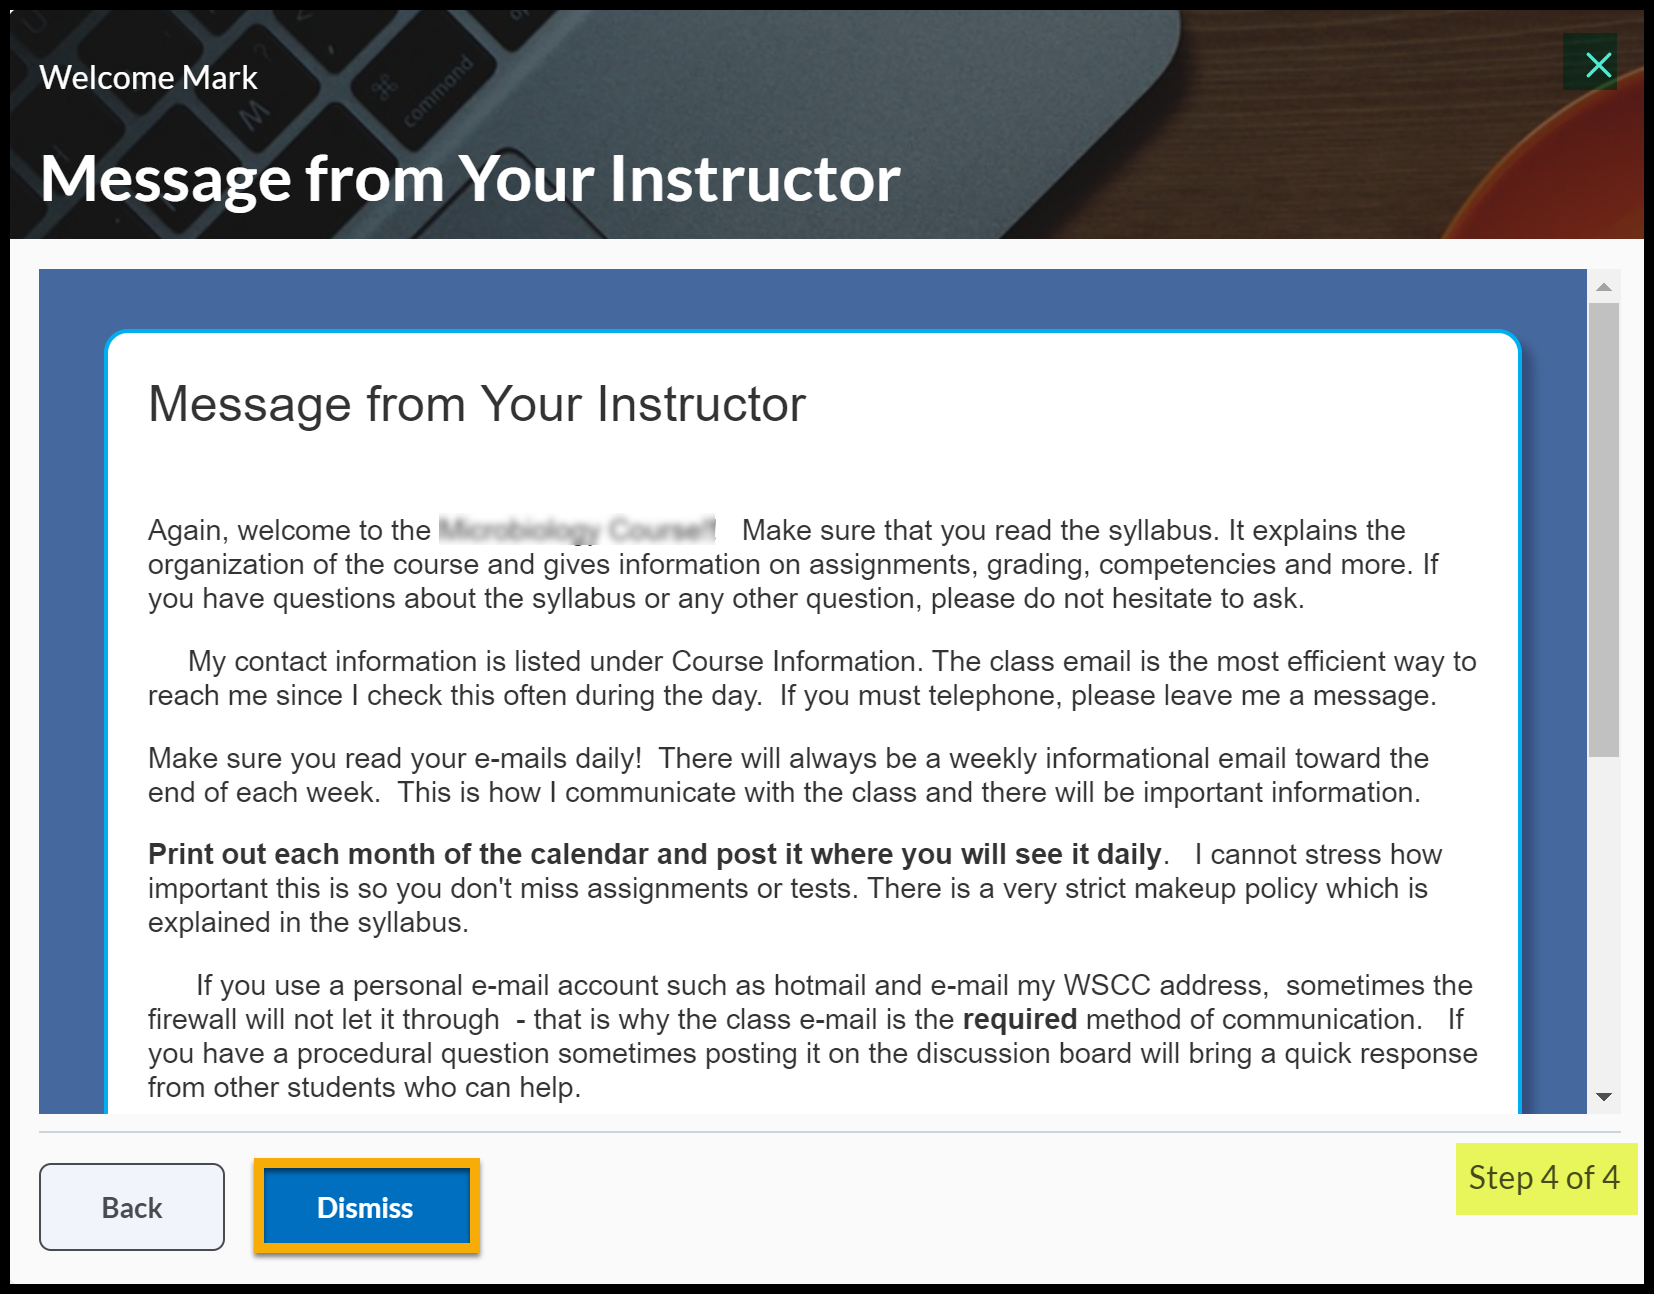 Typical Message from the Instructor page opened. Dismiss button highlighted as described.